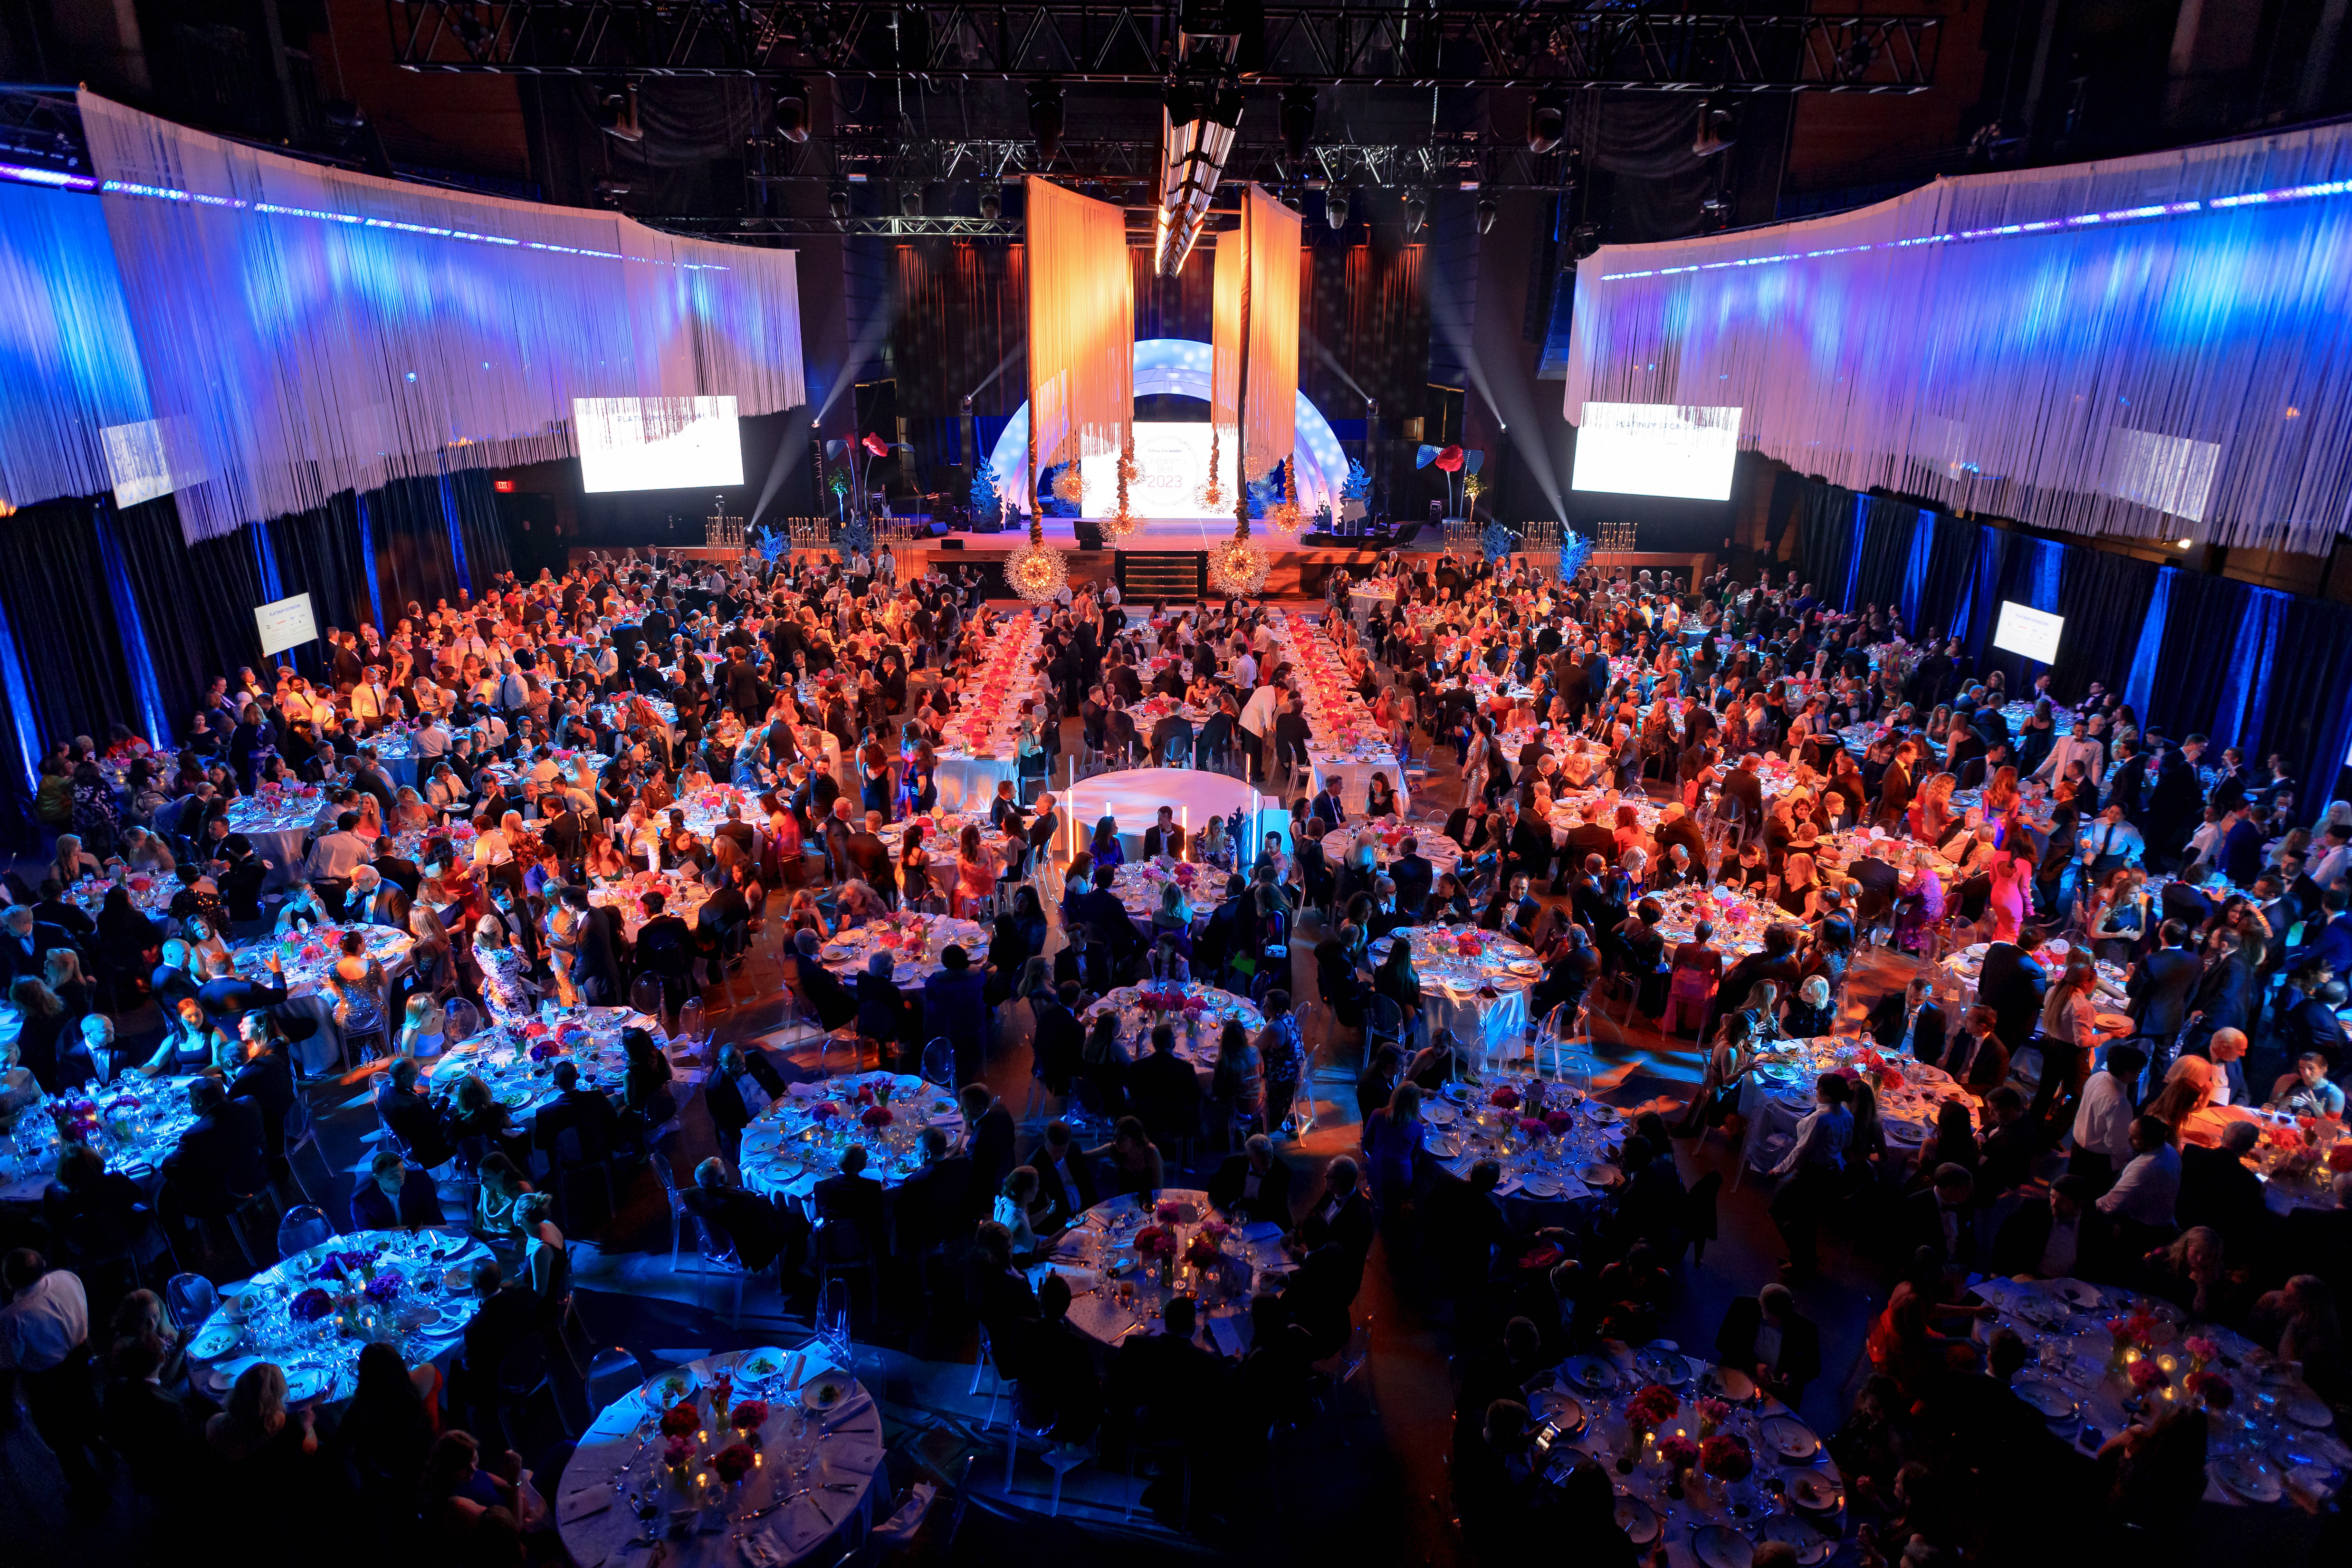 Sweeping view of the Children's Ball gala.